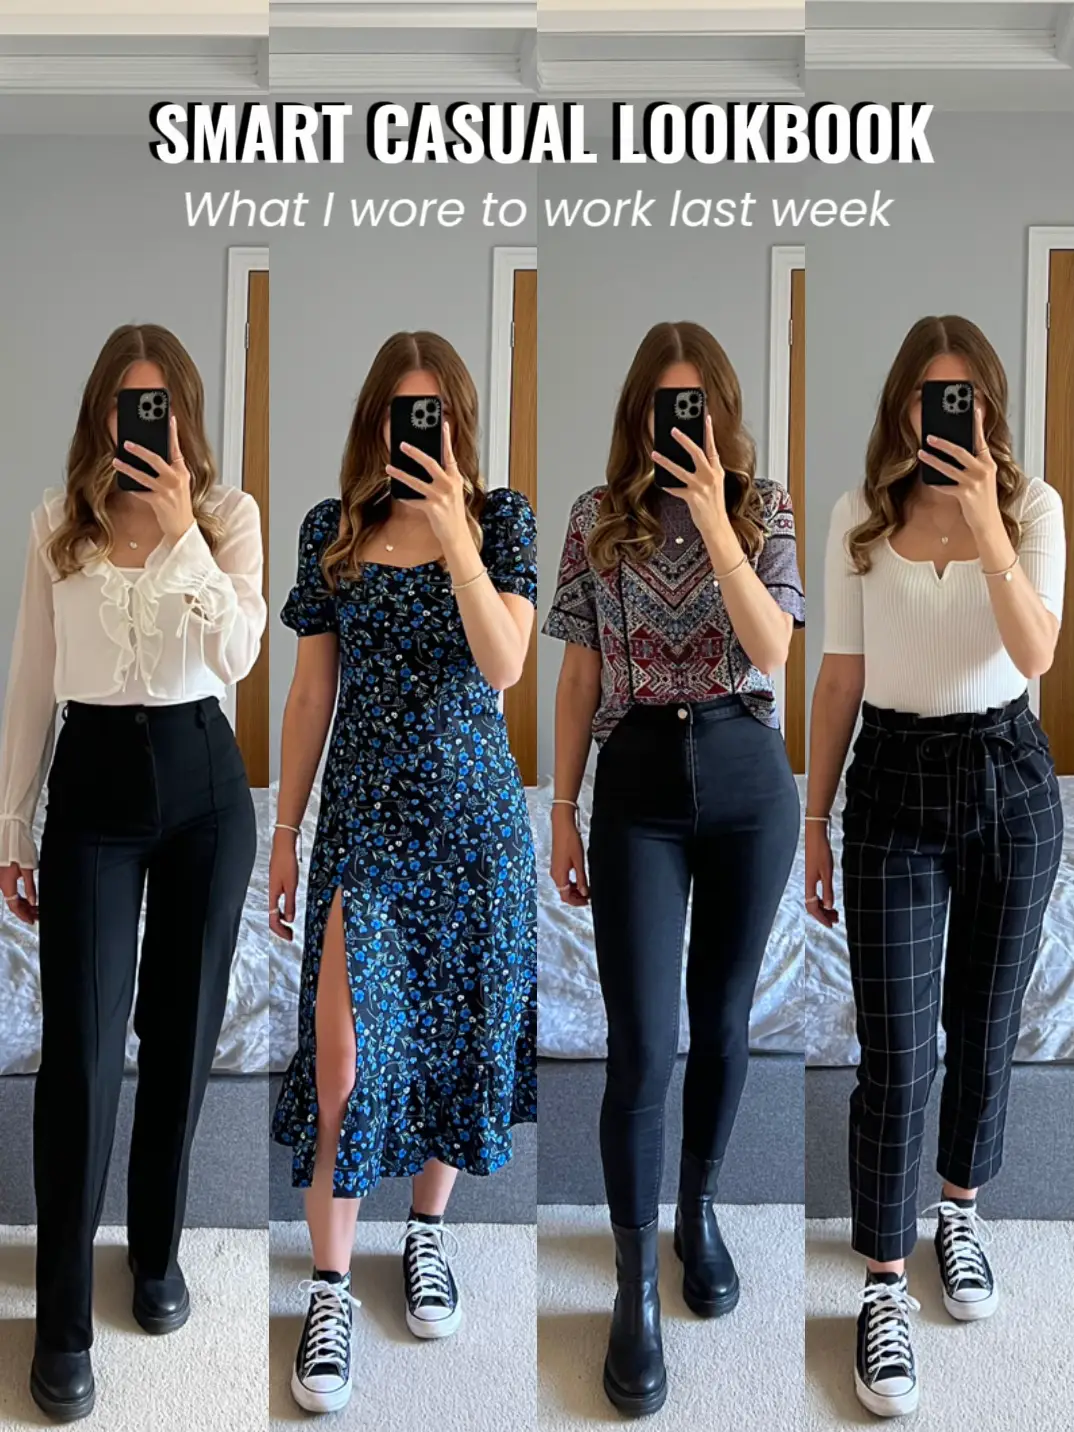 SUMMER WORK OUTFIT IDEAS, Gallery posted by izzi 🖤